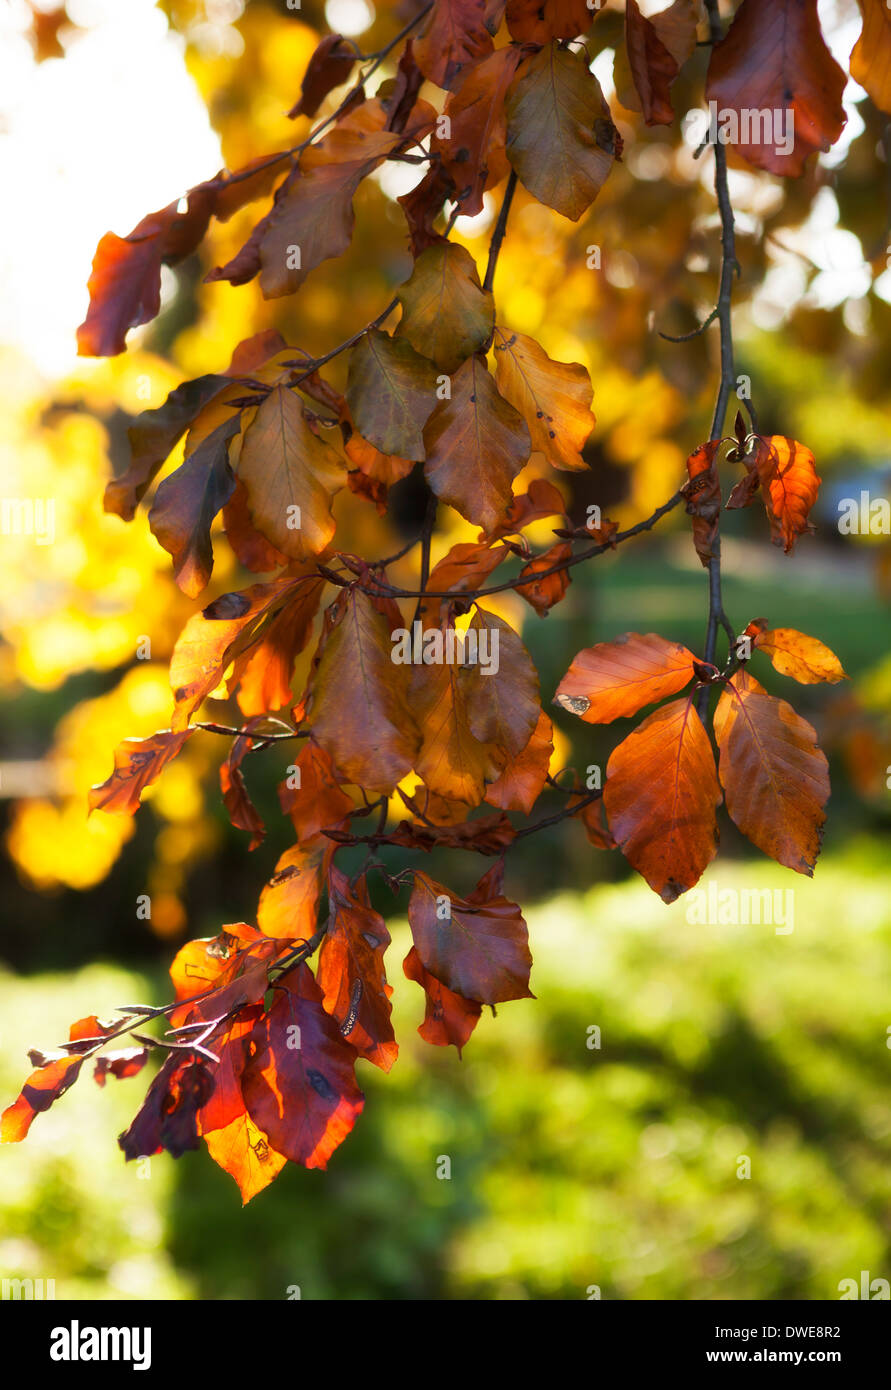 Autumn leaves of Copper Beech tree Stock Photo